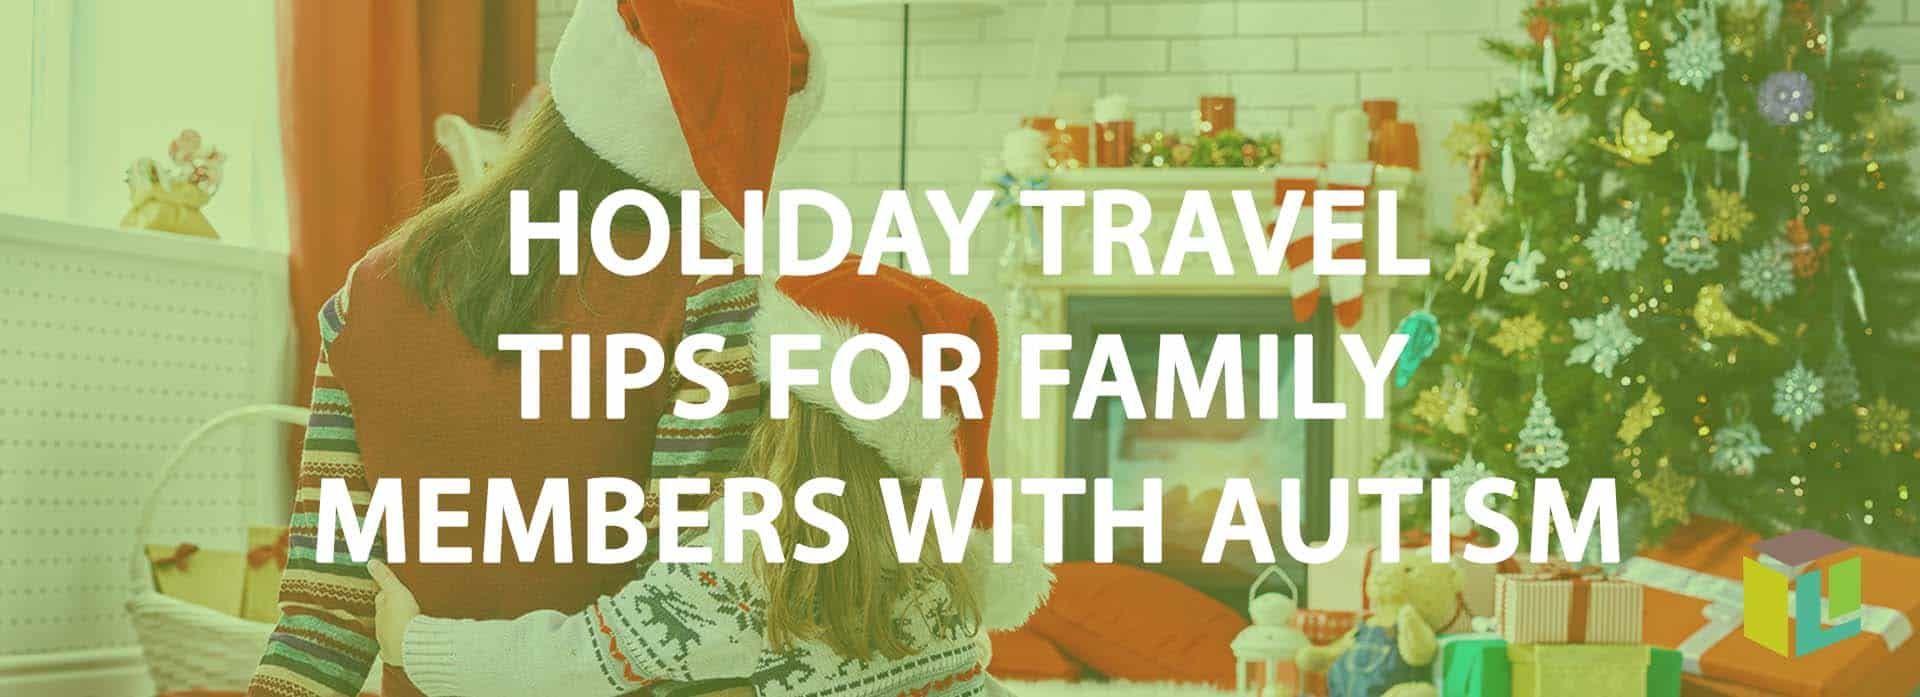 Holiday Travel Tips For Family Members With Autism Holiday Travel Tips For Family Members With Autism Holiday Travel Tips For Family Members With Autism Holiday Travel Tips For Family Members With Autism